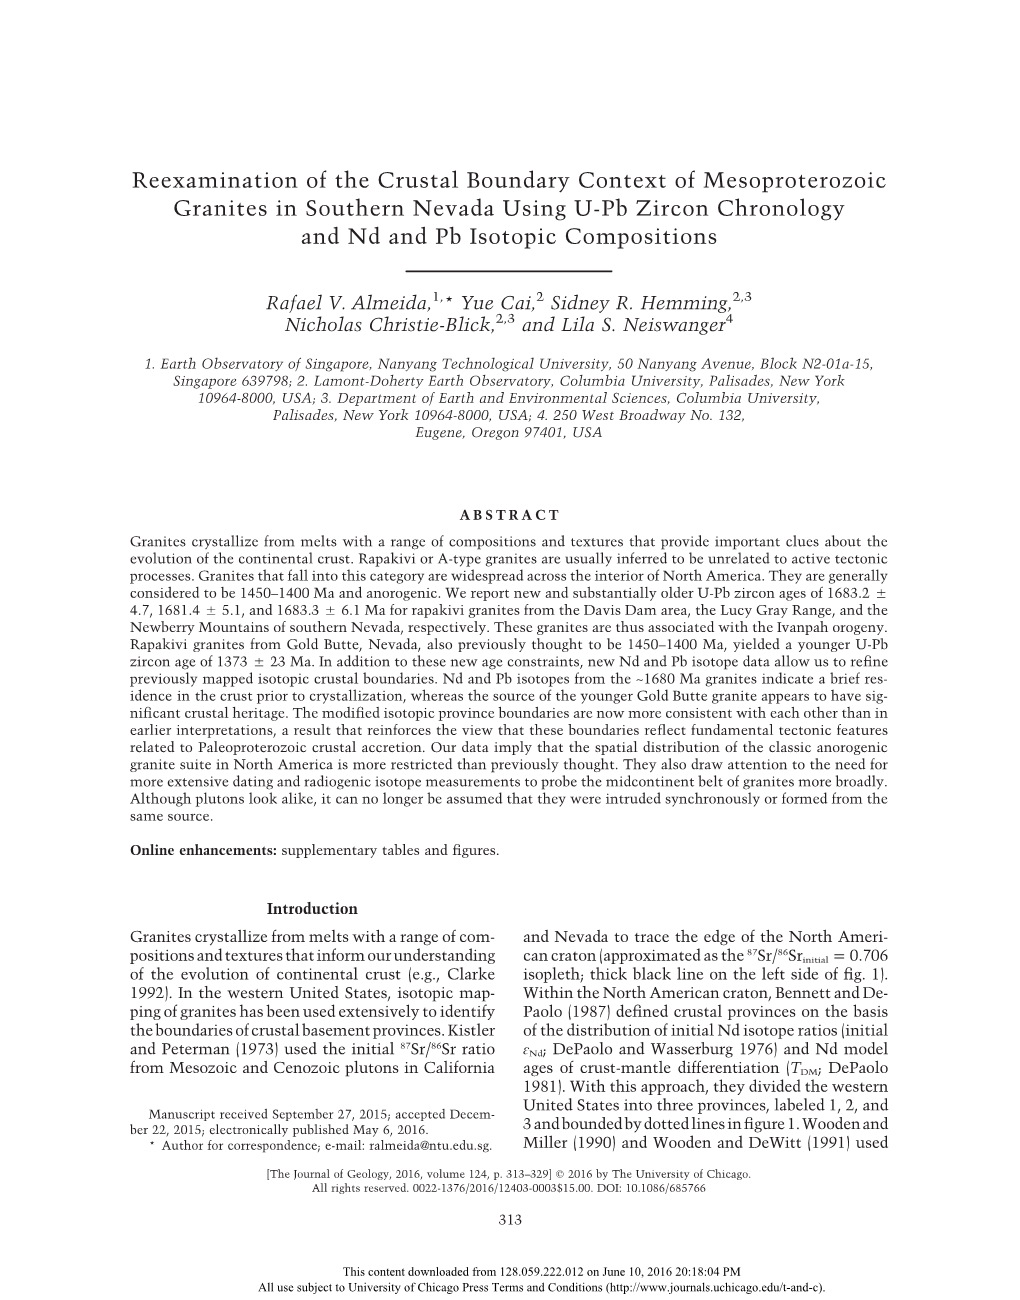 Reexamination of the Crustal Boundary Context of Mesoproterozoic Granites in Southern Nevada Using U-Pb Zircon Chronology and Nd and Pb Isotopic Compositions